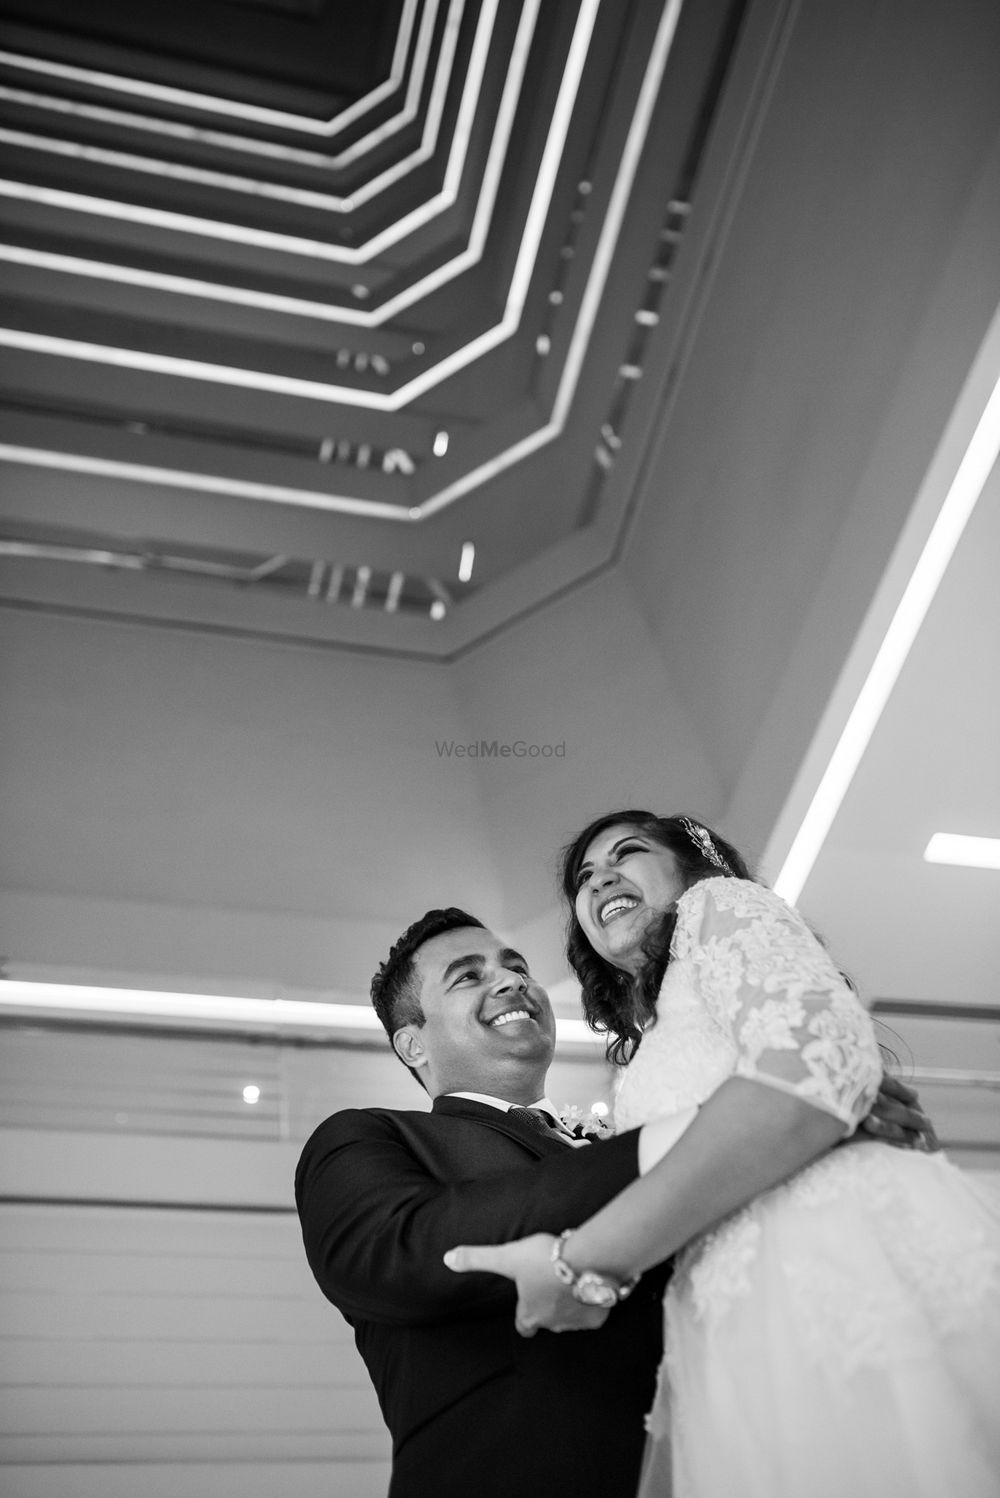 Photo From Lovita Weds Melrick - By Elvin Jacob Photography